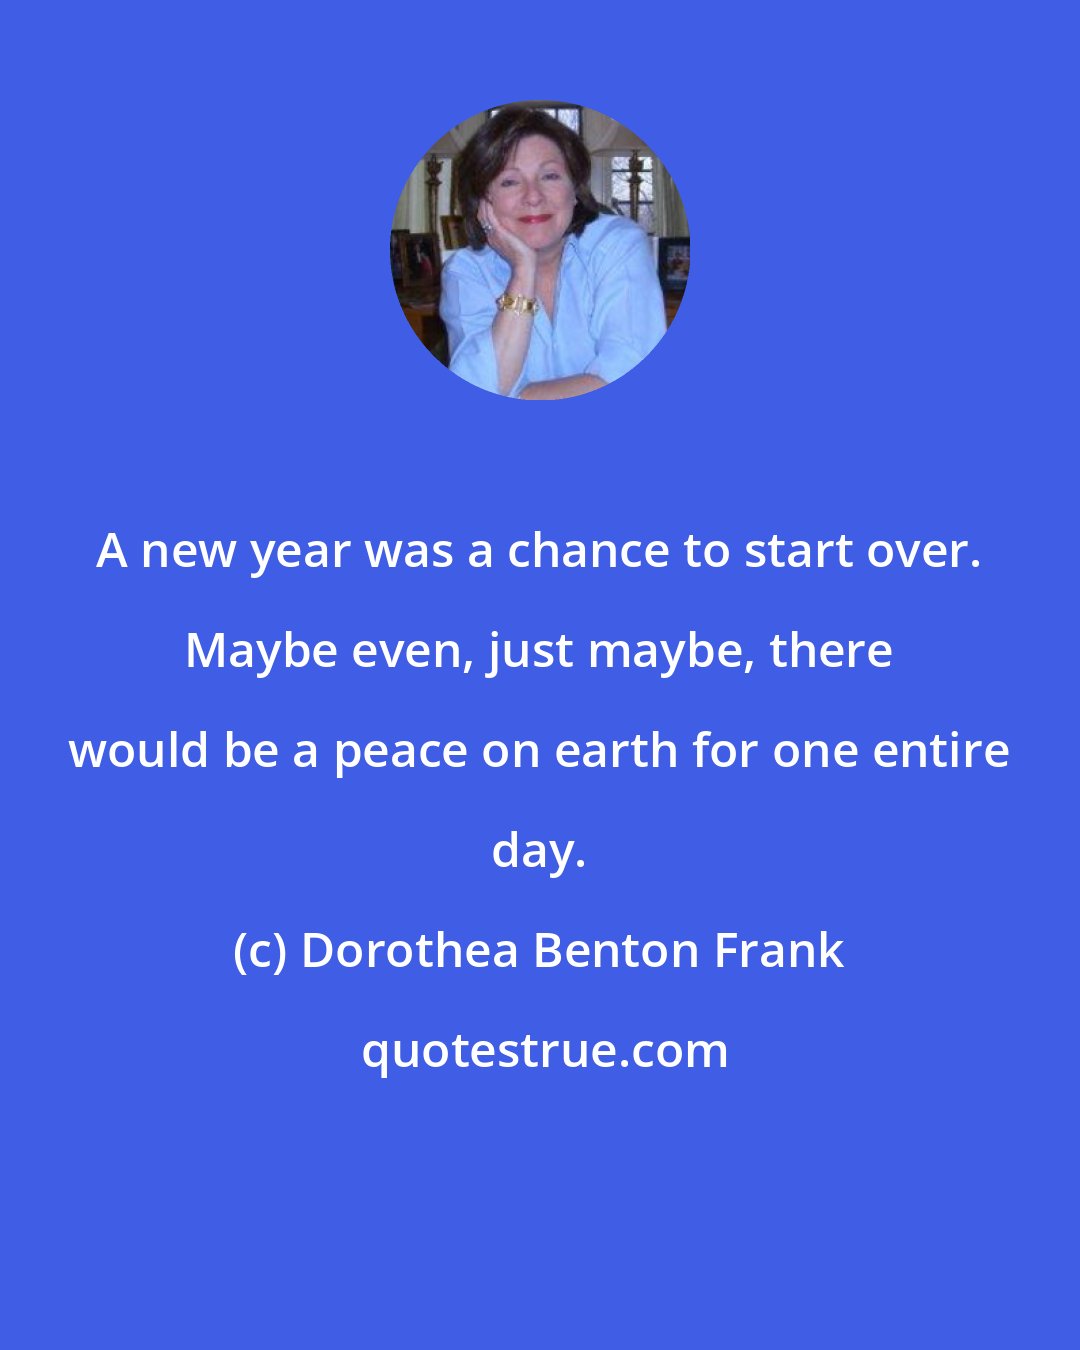 Dorothea Benton Frank: A new year was a chance to start over. Maybe even, just maybe, there would be a peace on earth for one entire day.